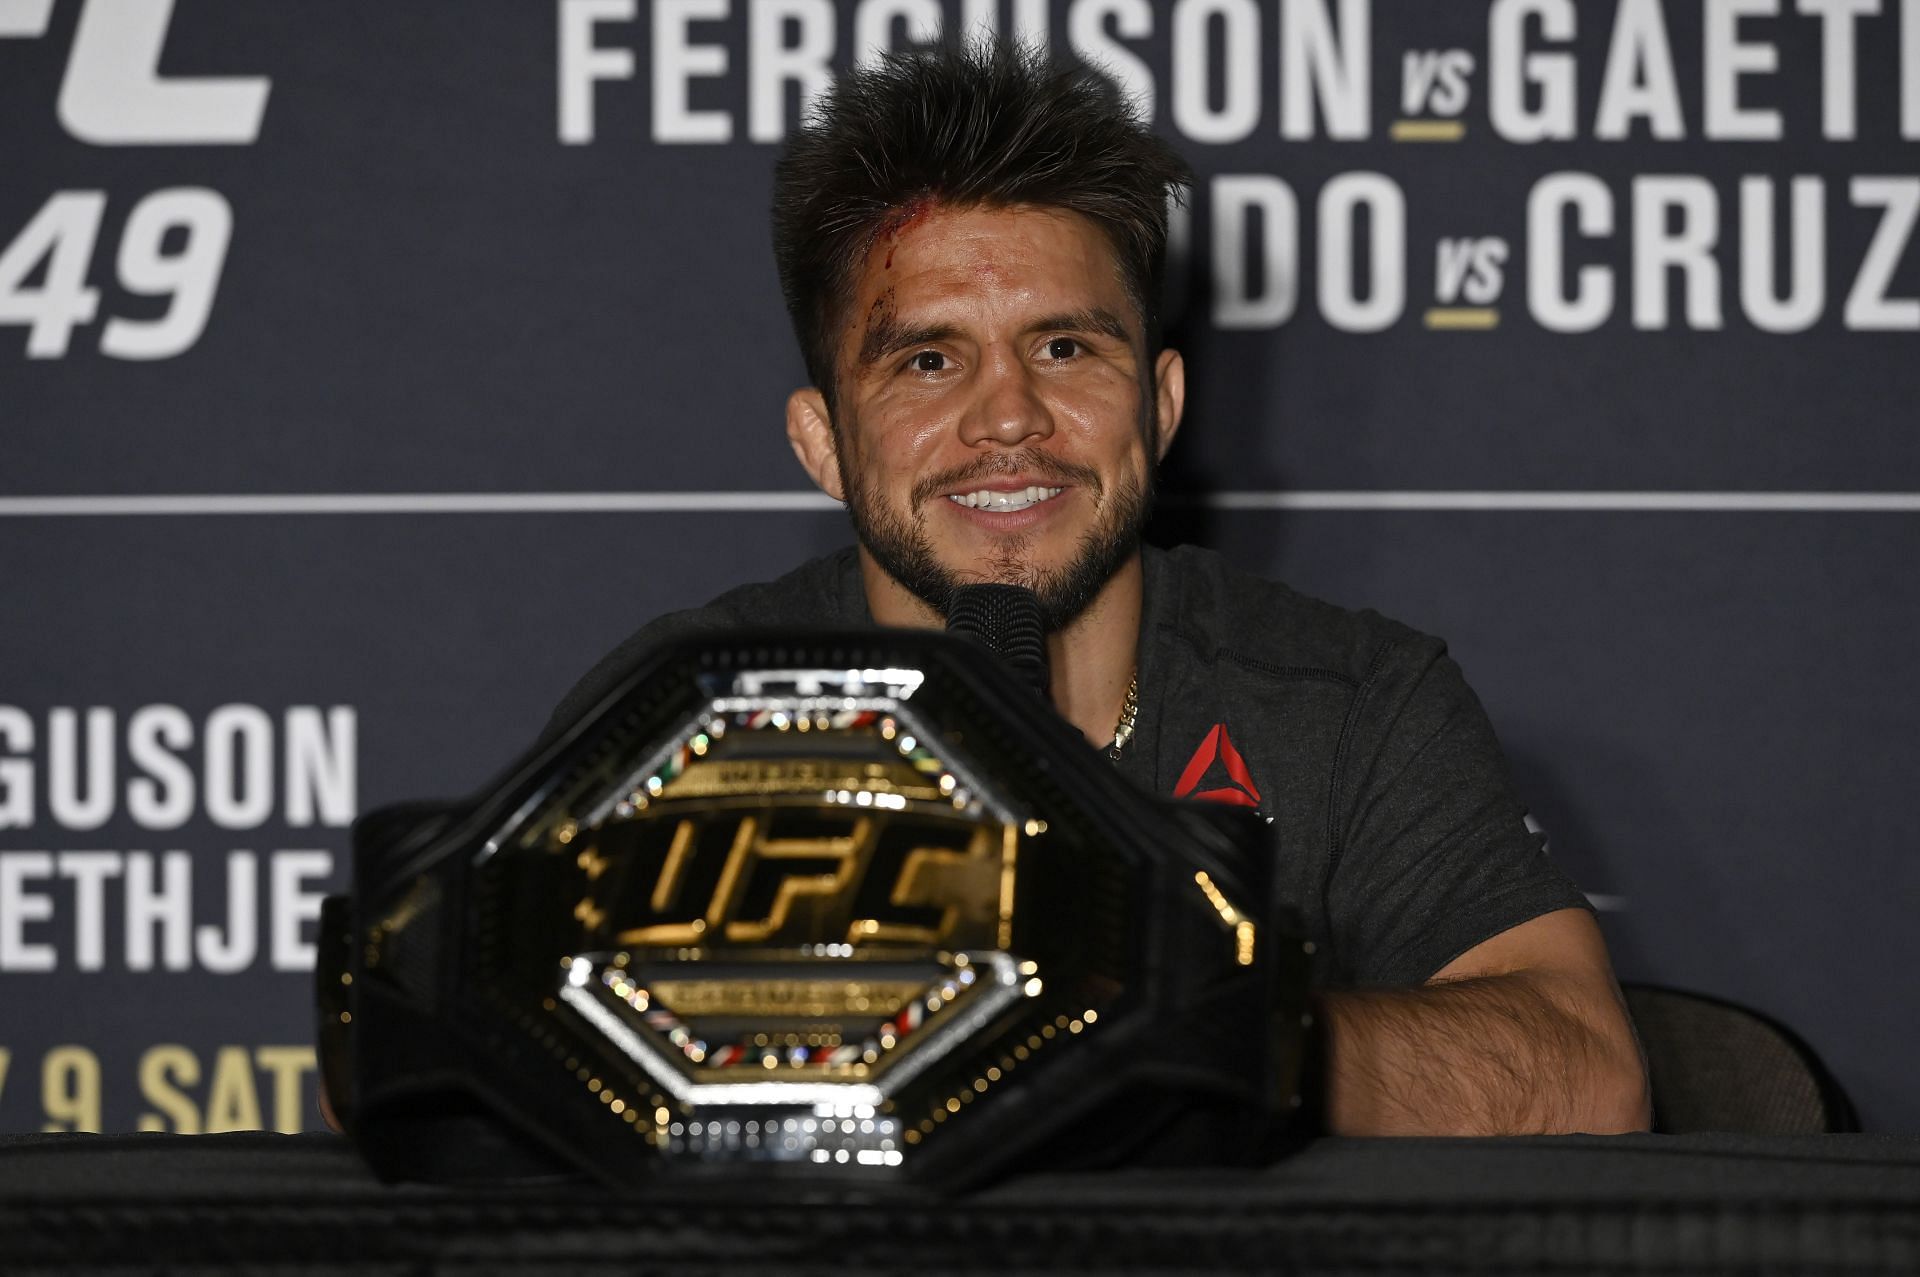 Henry Cejudo is a former two-division UFC Champion